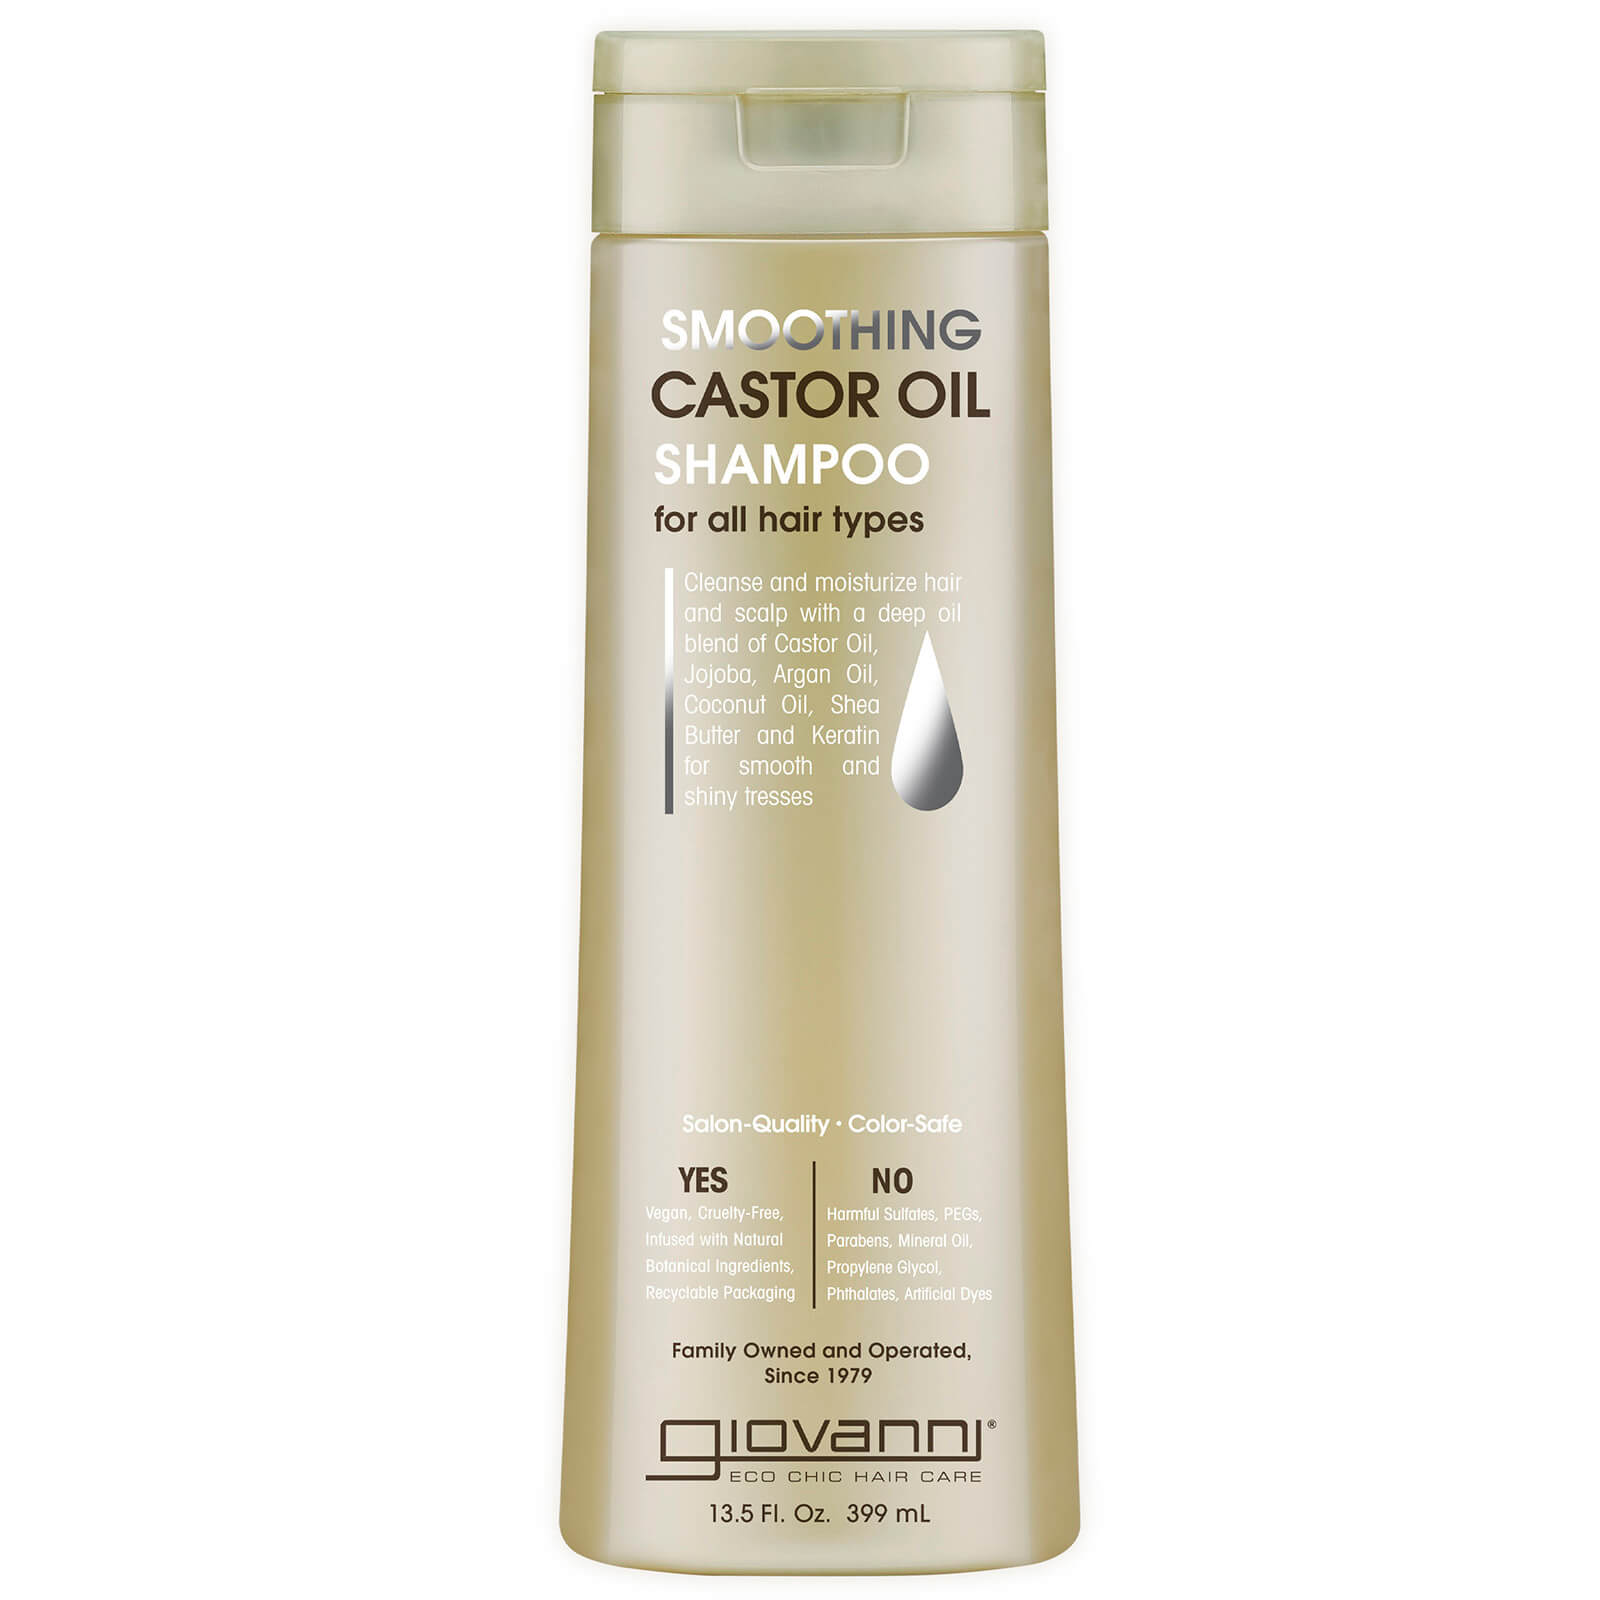 Image of Giovanni Smoothing Castor Oil Shampoo 399ml